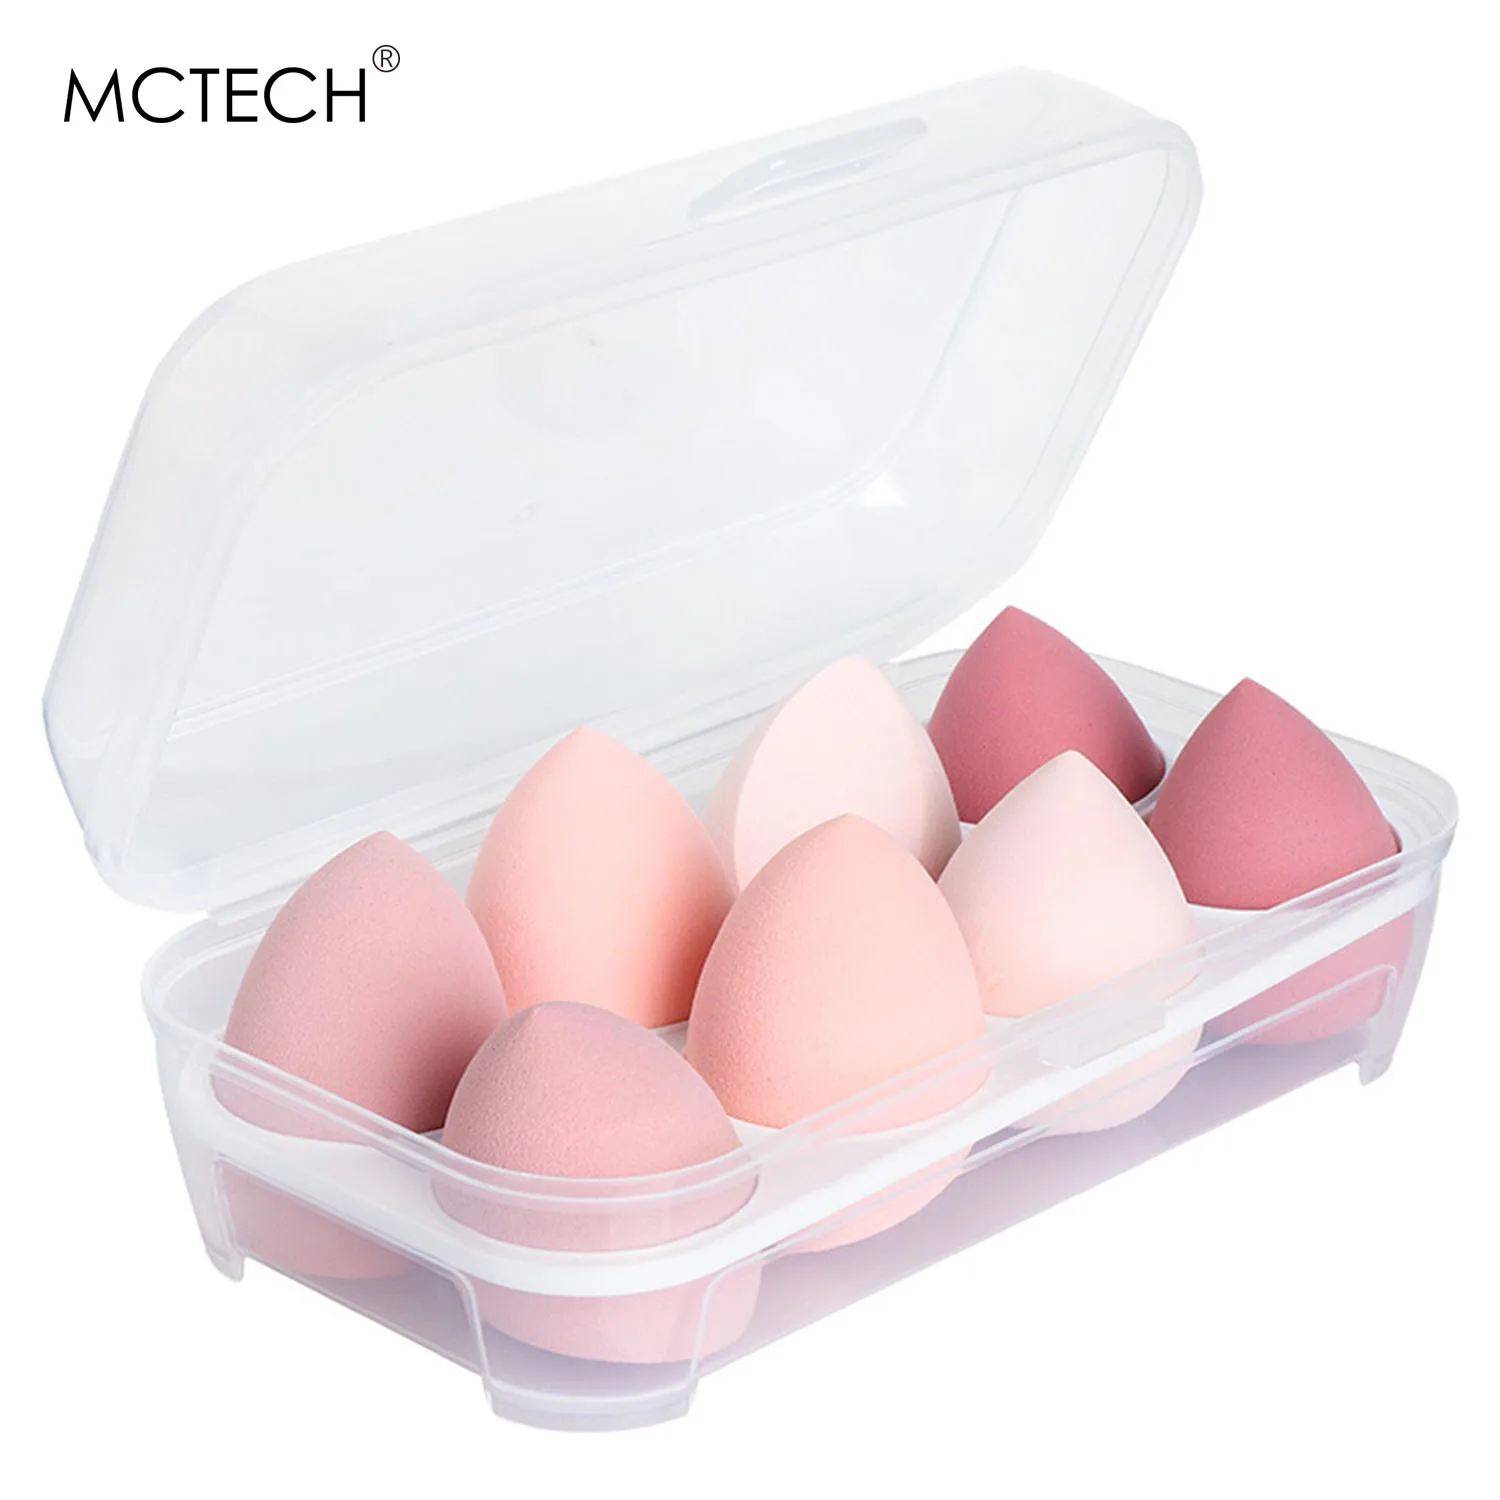 Foundation Facial Makeup Sponge Cosmetic Puff beauty makeup sponge blender make up puff with box